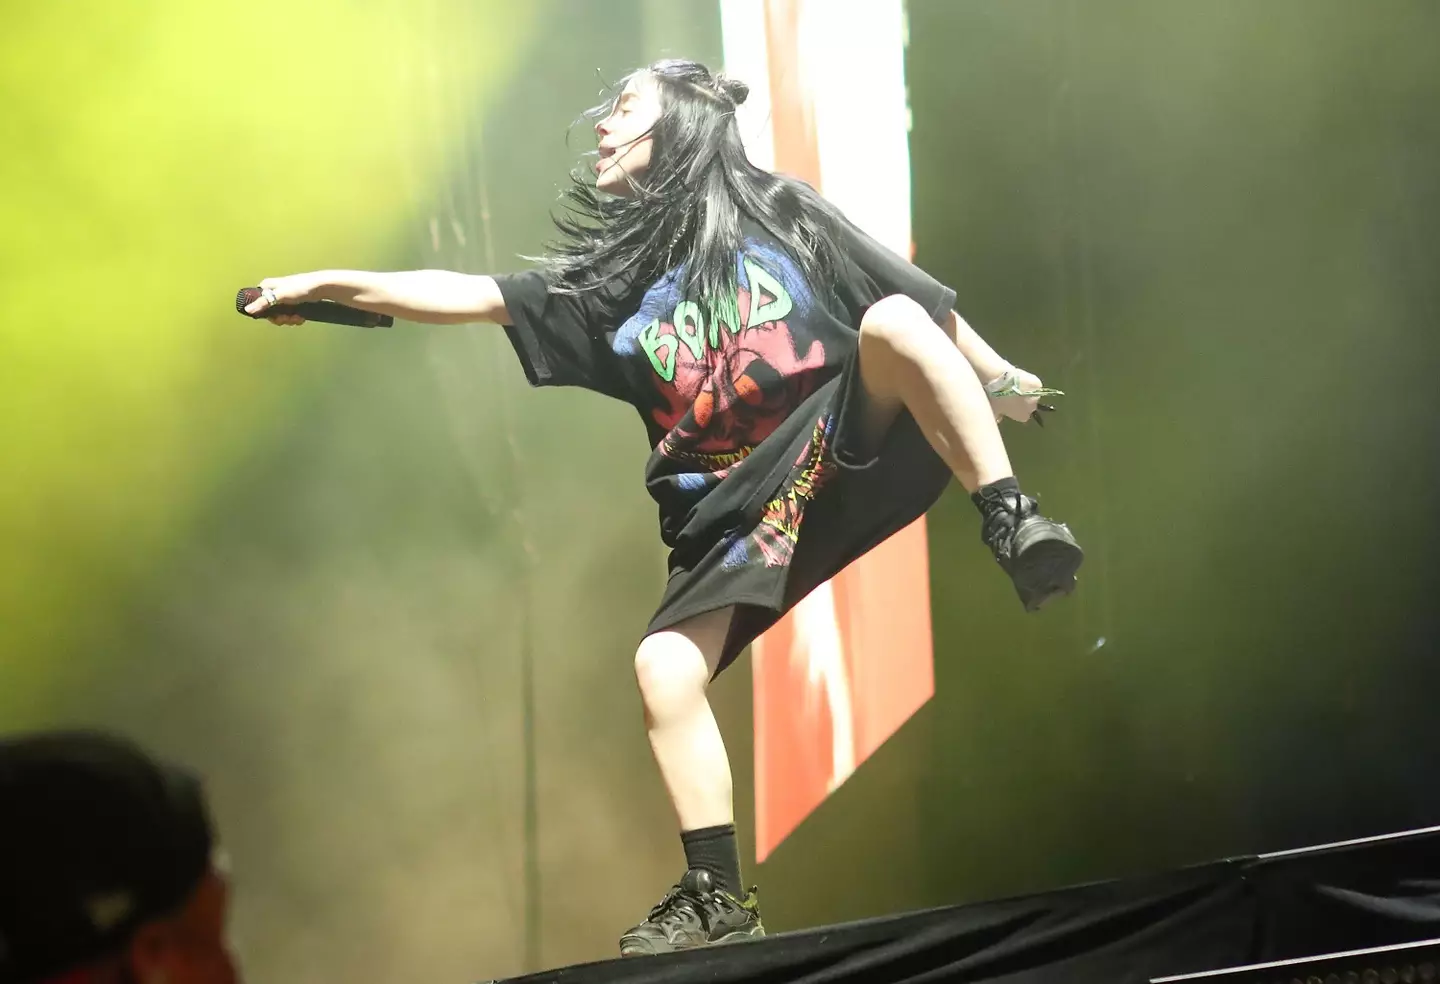 Billie Eilish has admitted using a body double on stage at Coachella with the help of one of her dancers and a disguise.